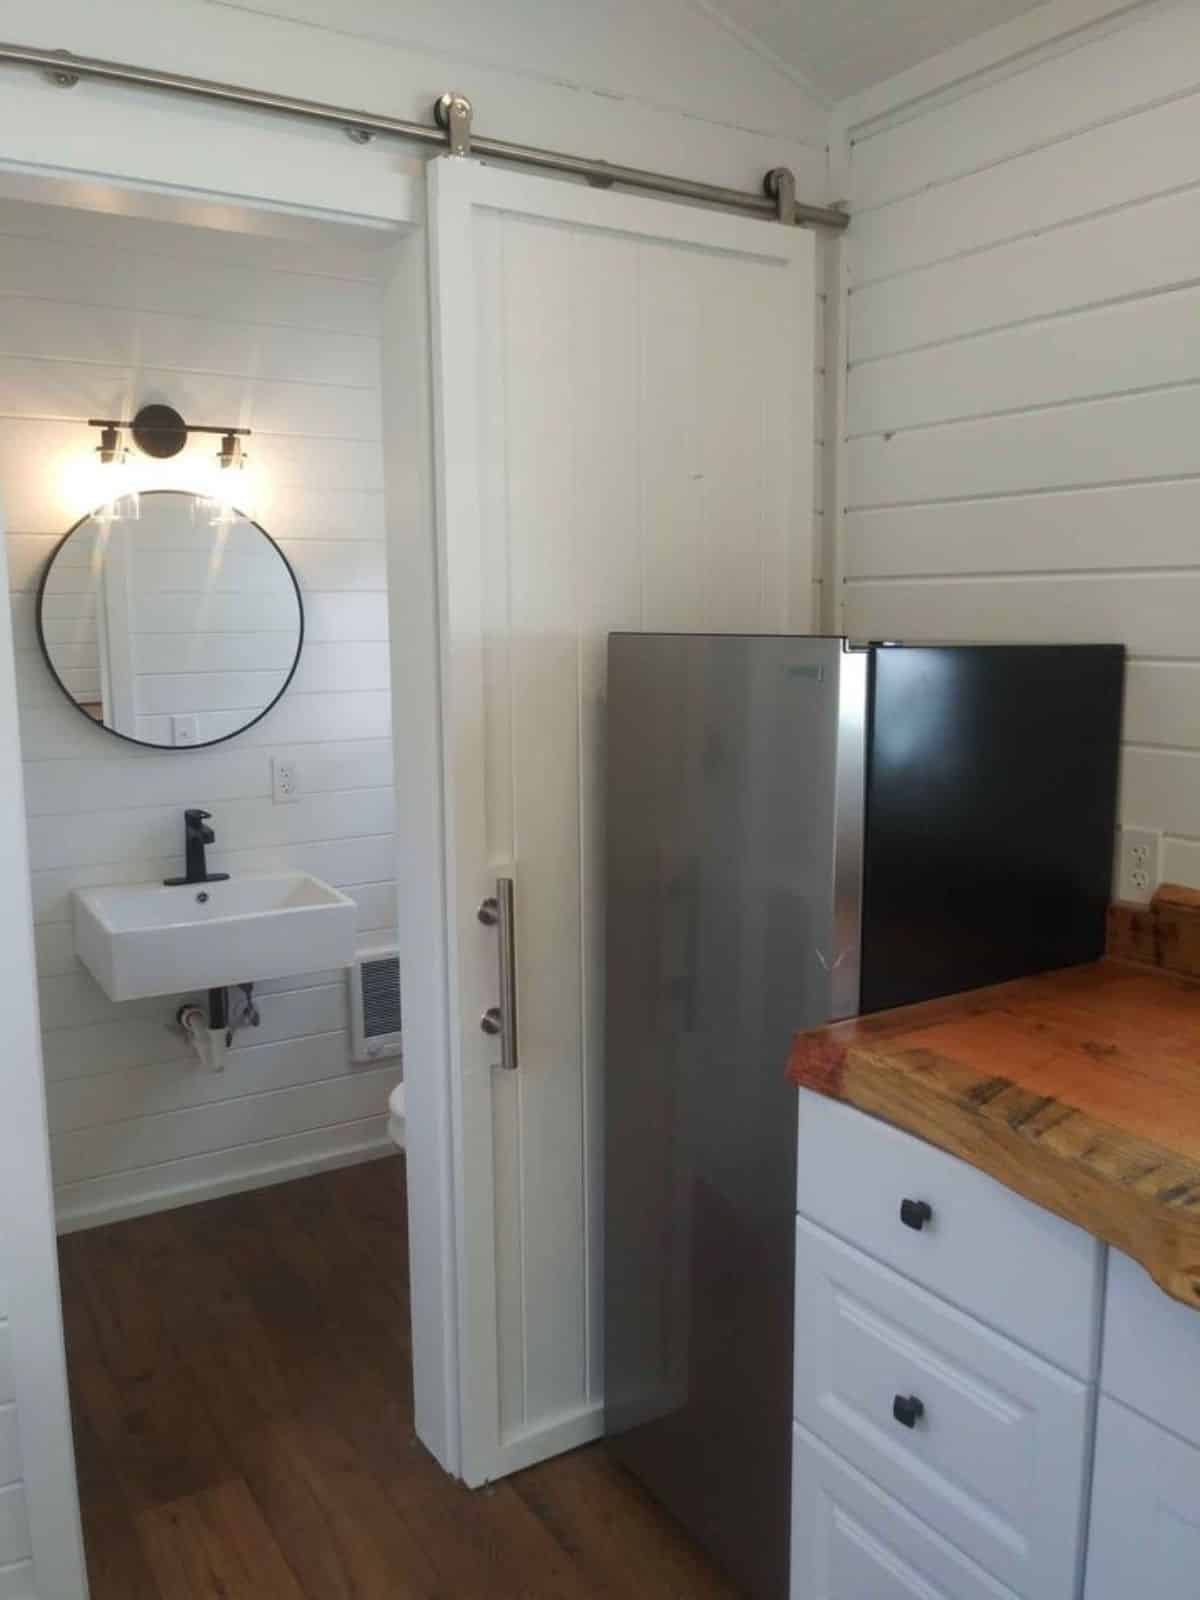 full size refrigerator in kitchen area of 20’ cottage tiny house